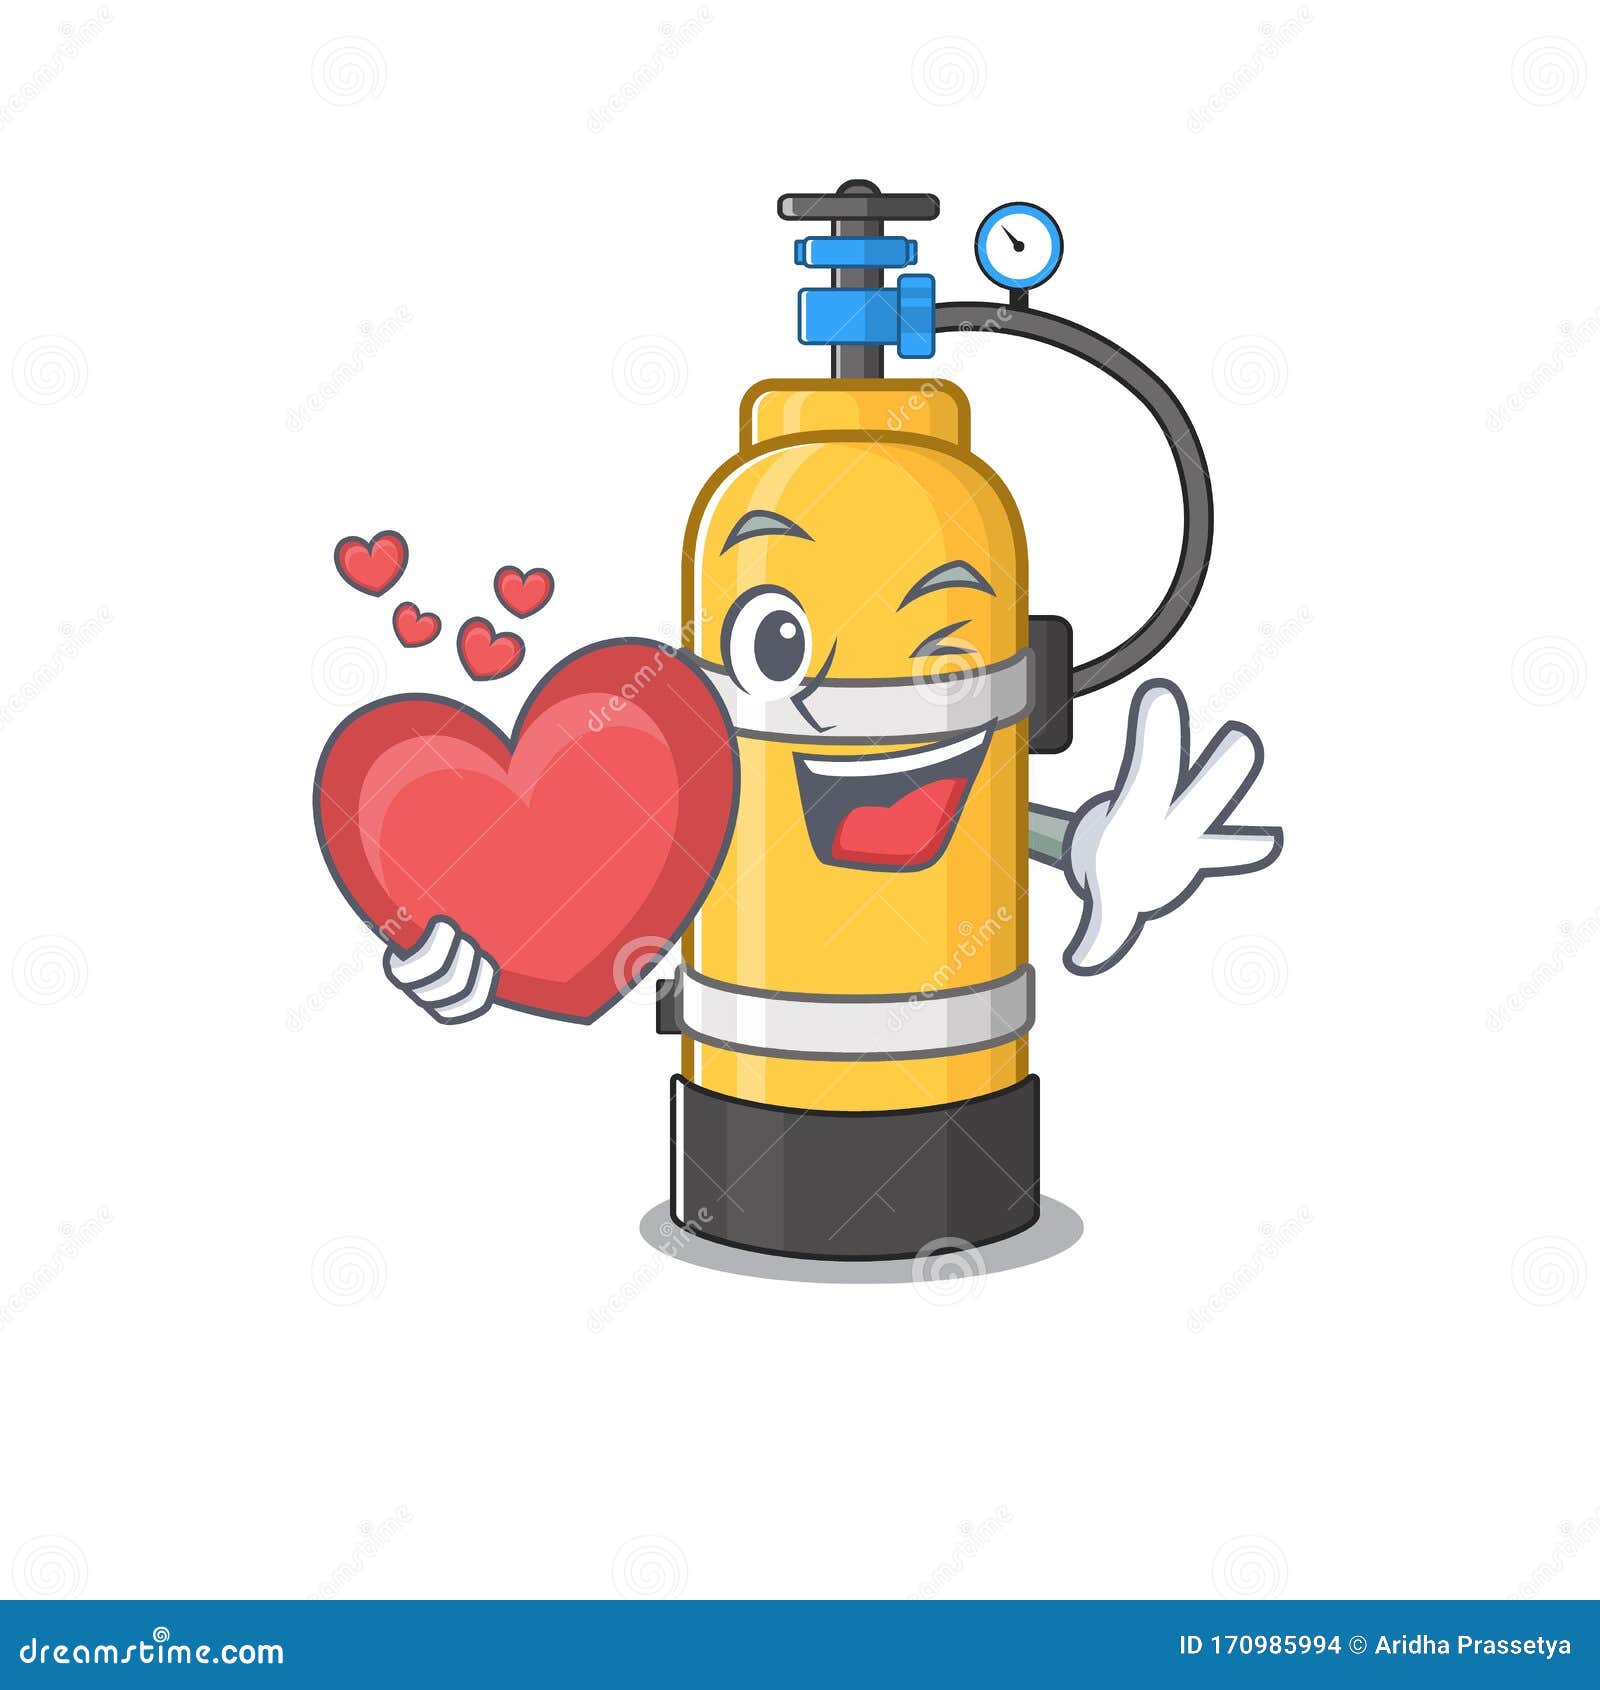 Funny Face Oxygen Cylinder Cartoon Character Holding a Heart Stock